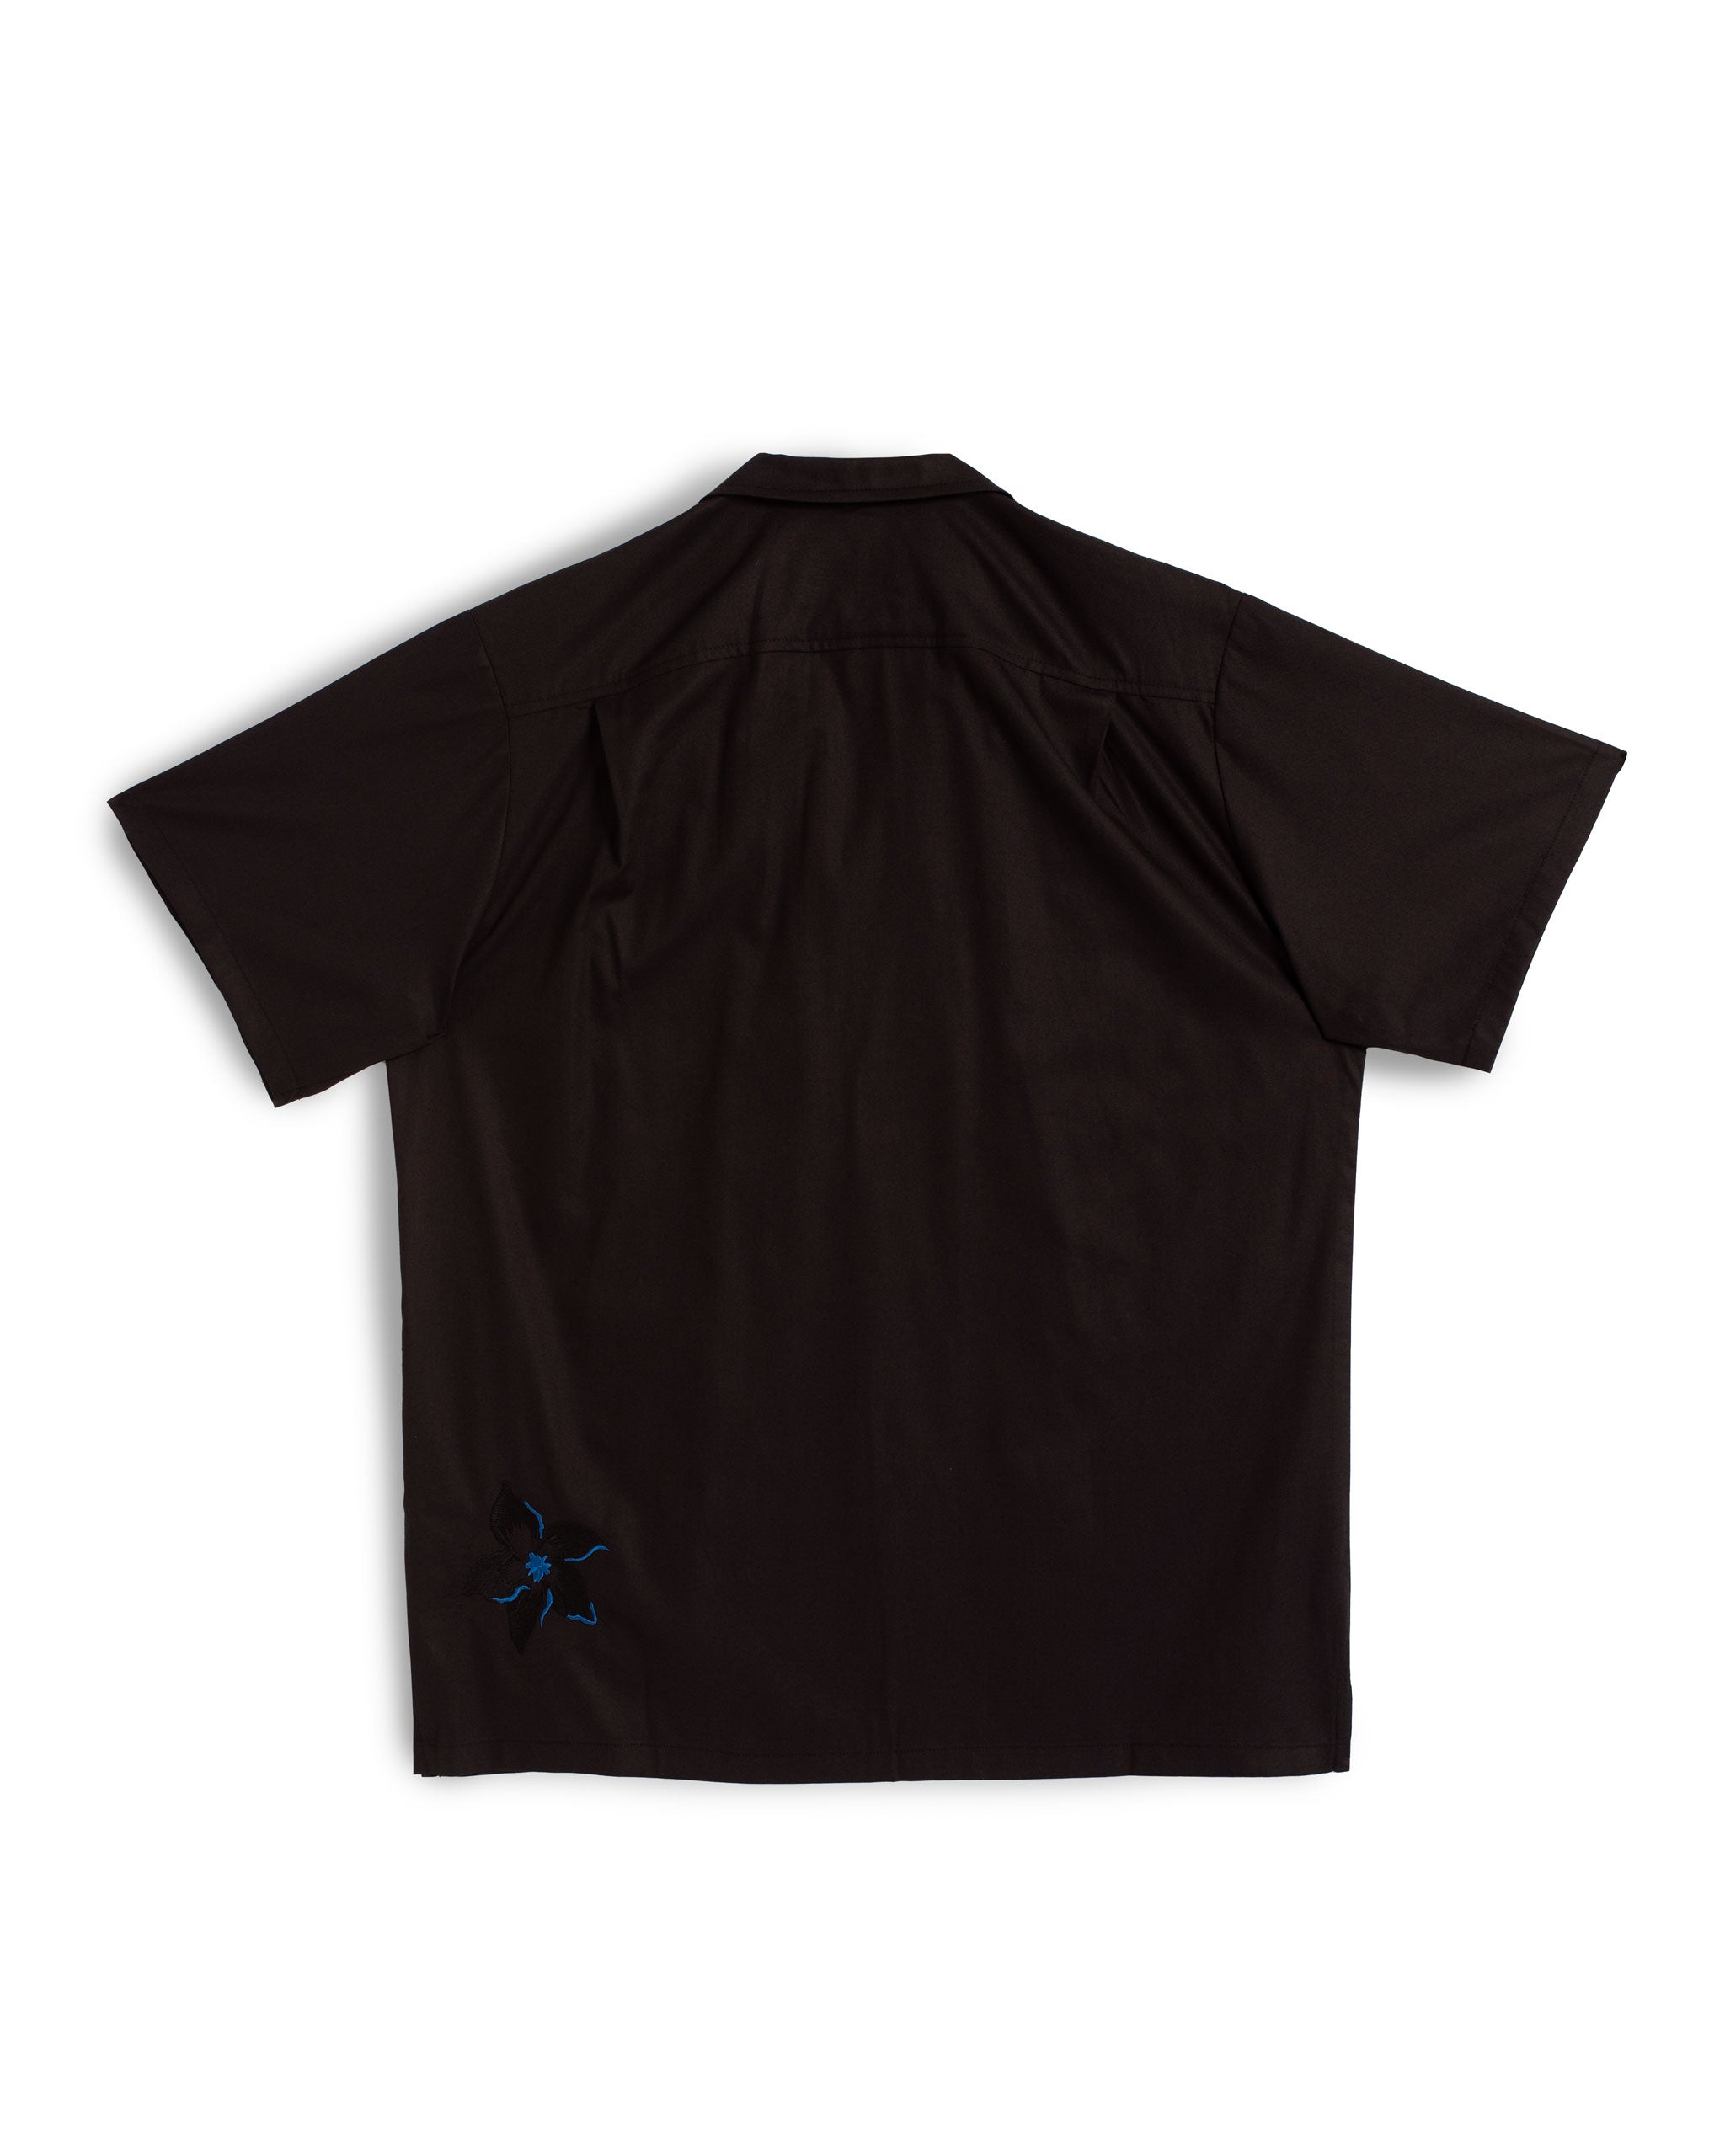 Back view of Black Embroidered Lily Camp Shirt